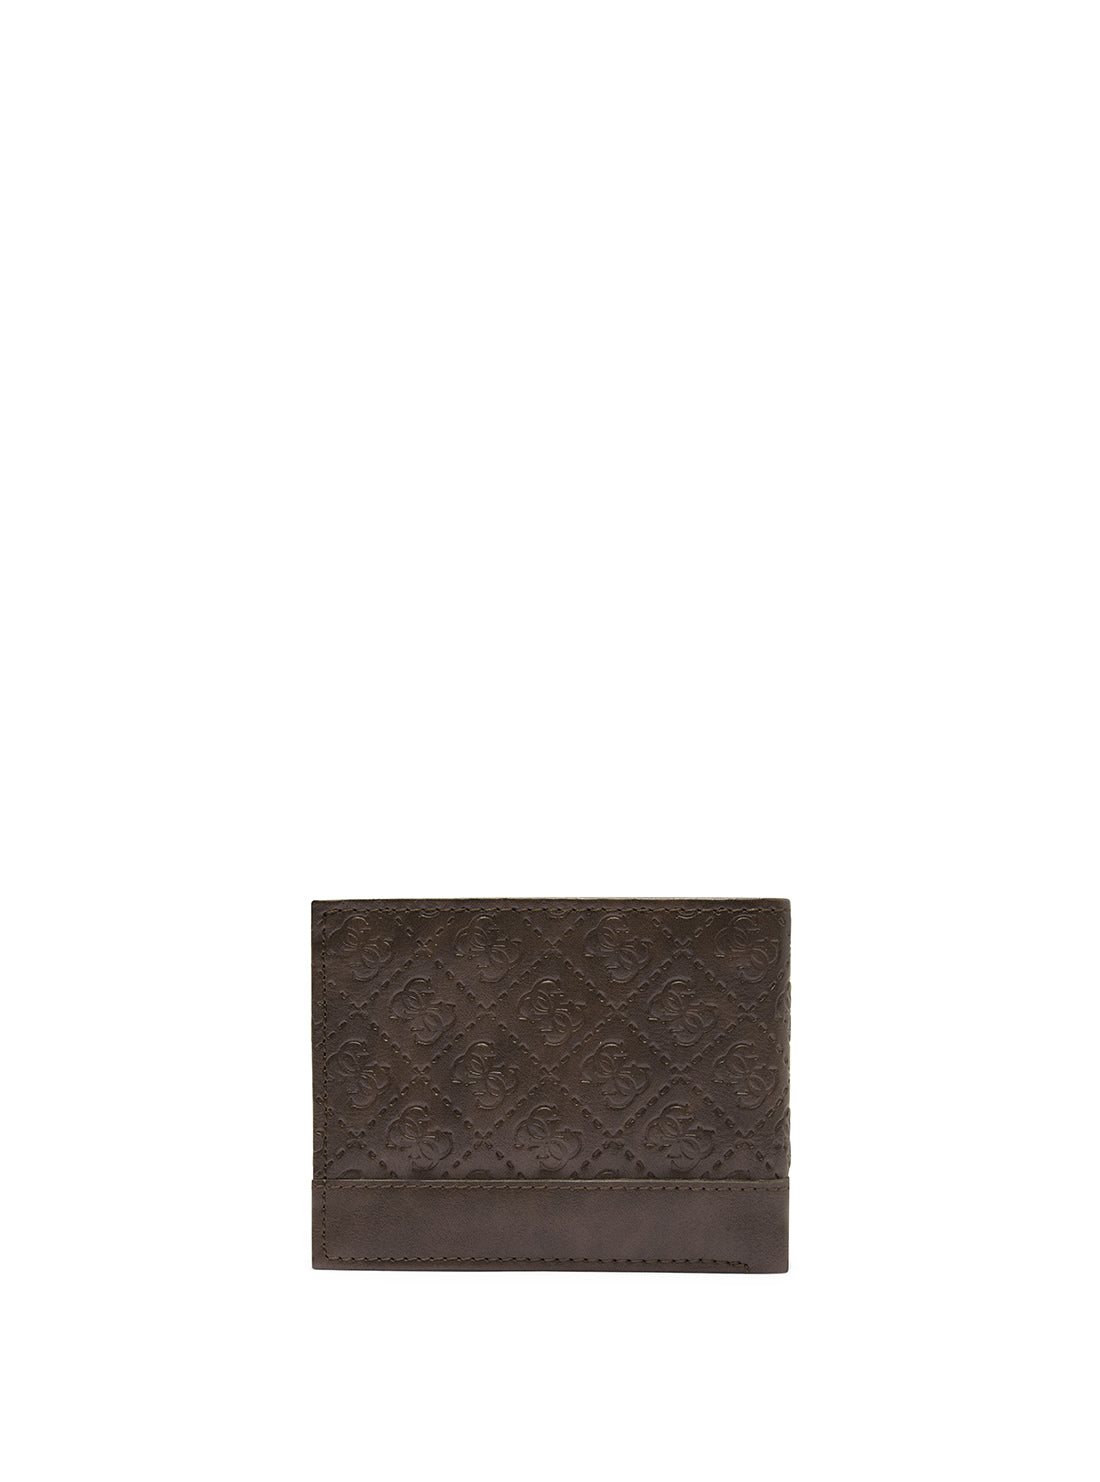 GUESS Brown Duane Slimfold Wallet back view